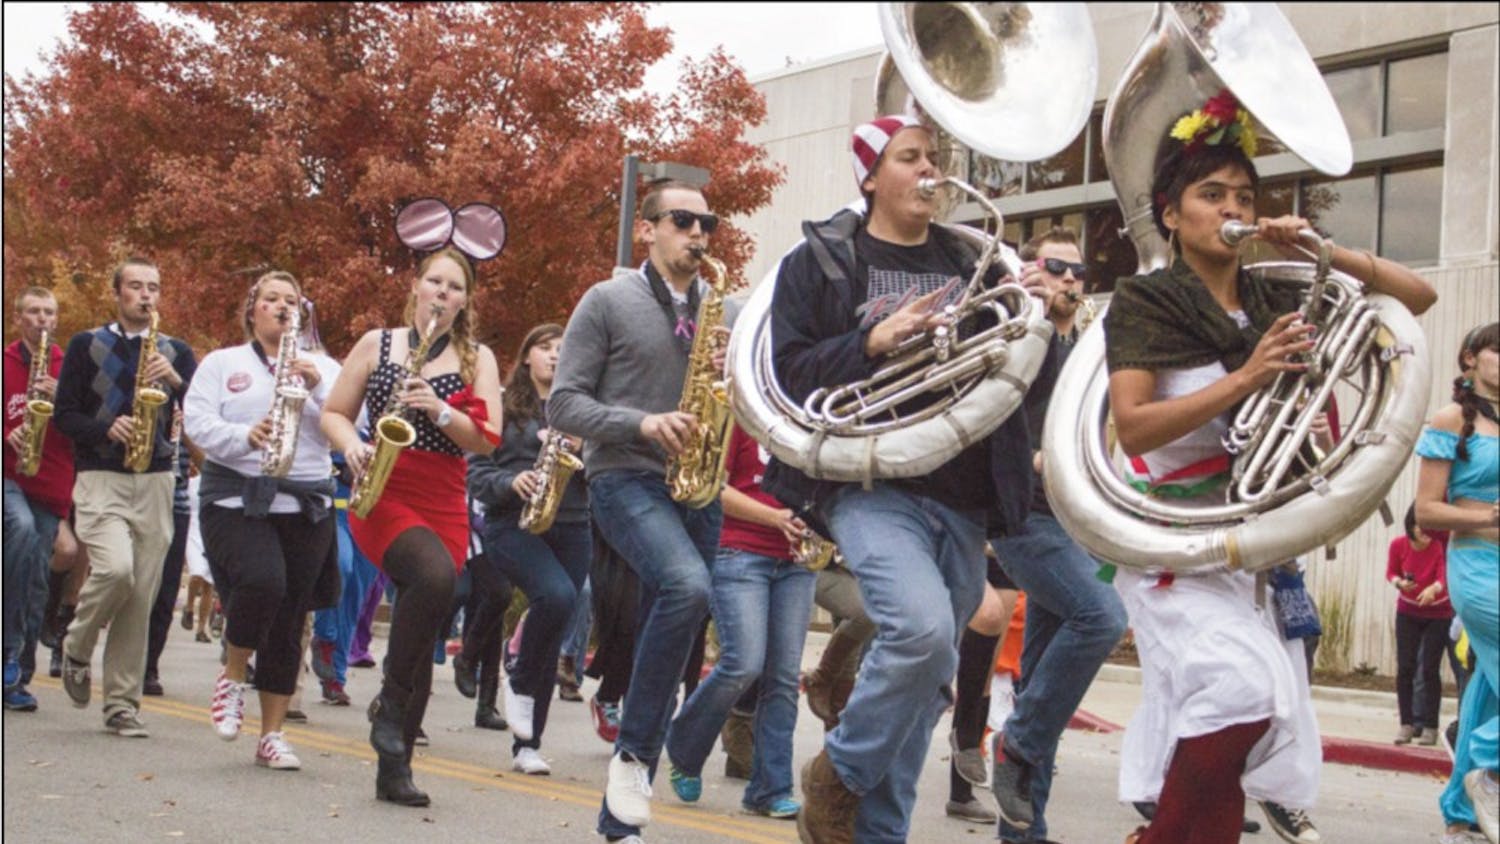 Members of the Marching Hundred parade down Kirkwood Avenue during homecoming festivities in 2013.